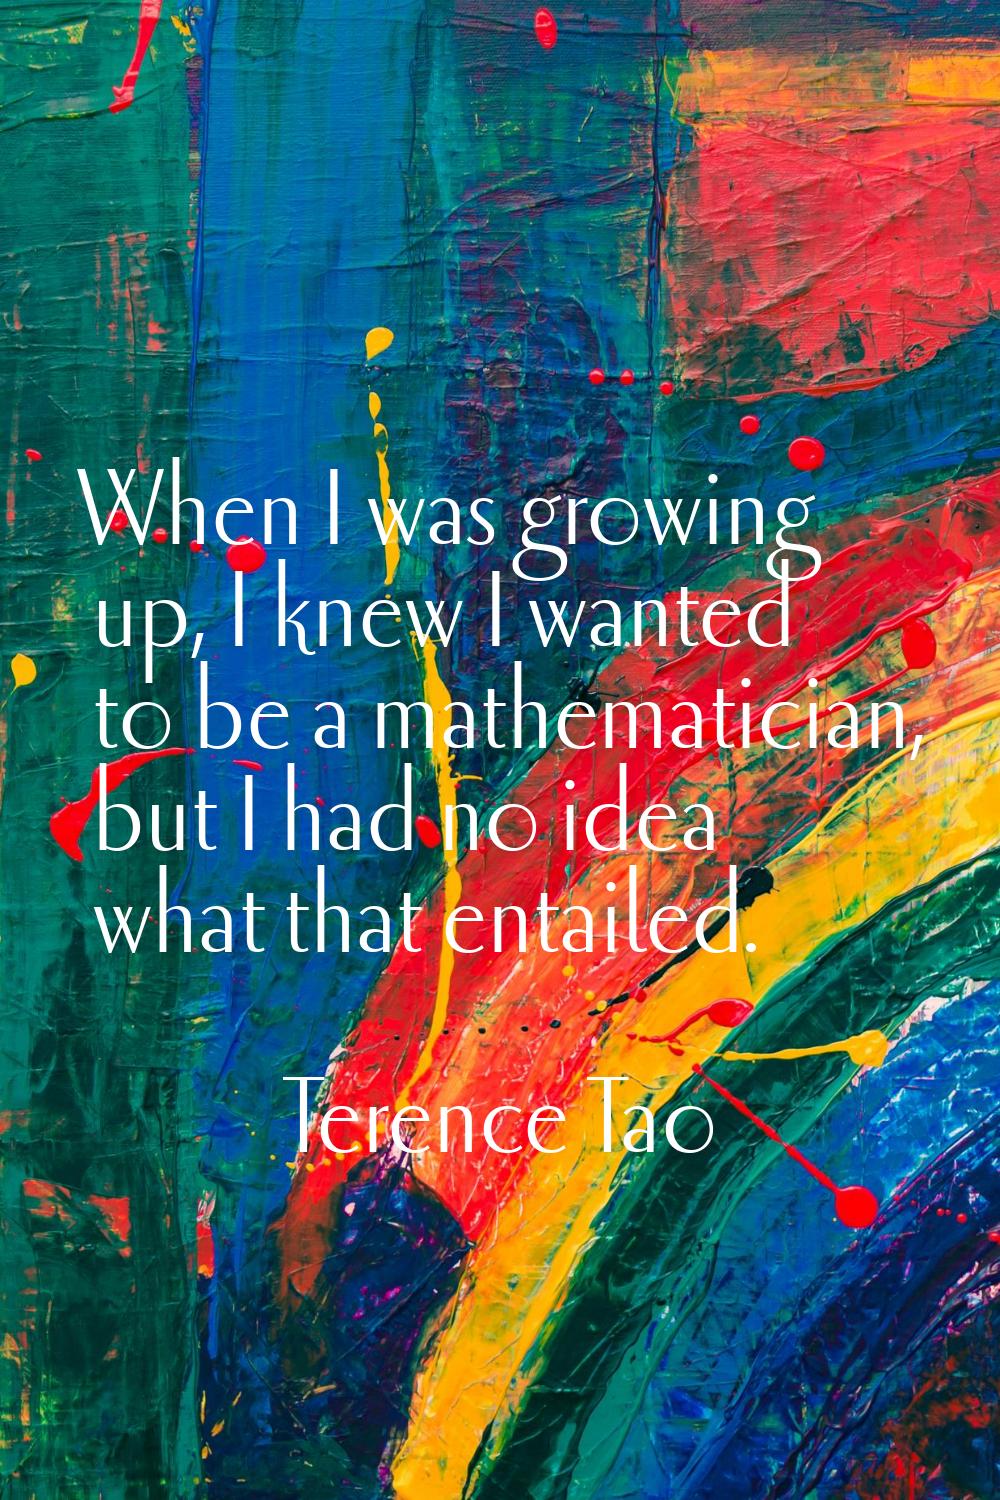 When I was growing up, I knew I wanted to be a mathematician, but I had no idea what that entailed.